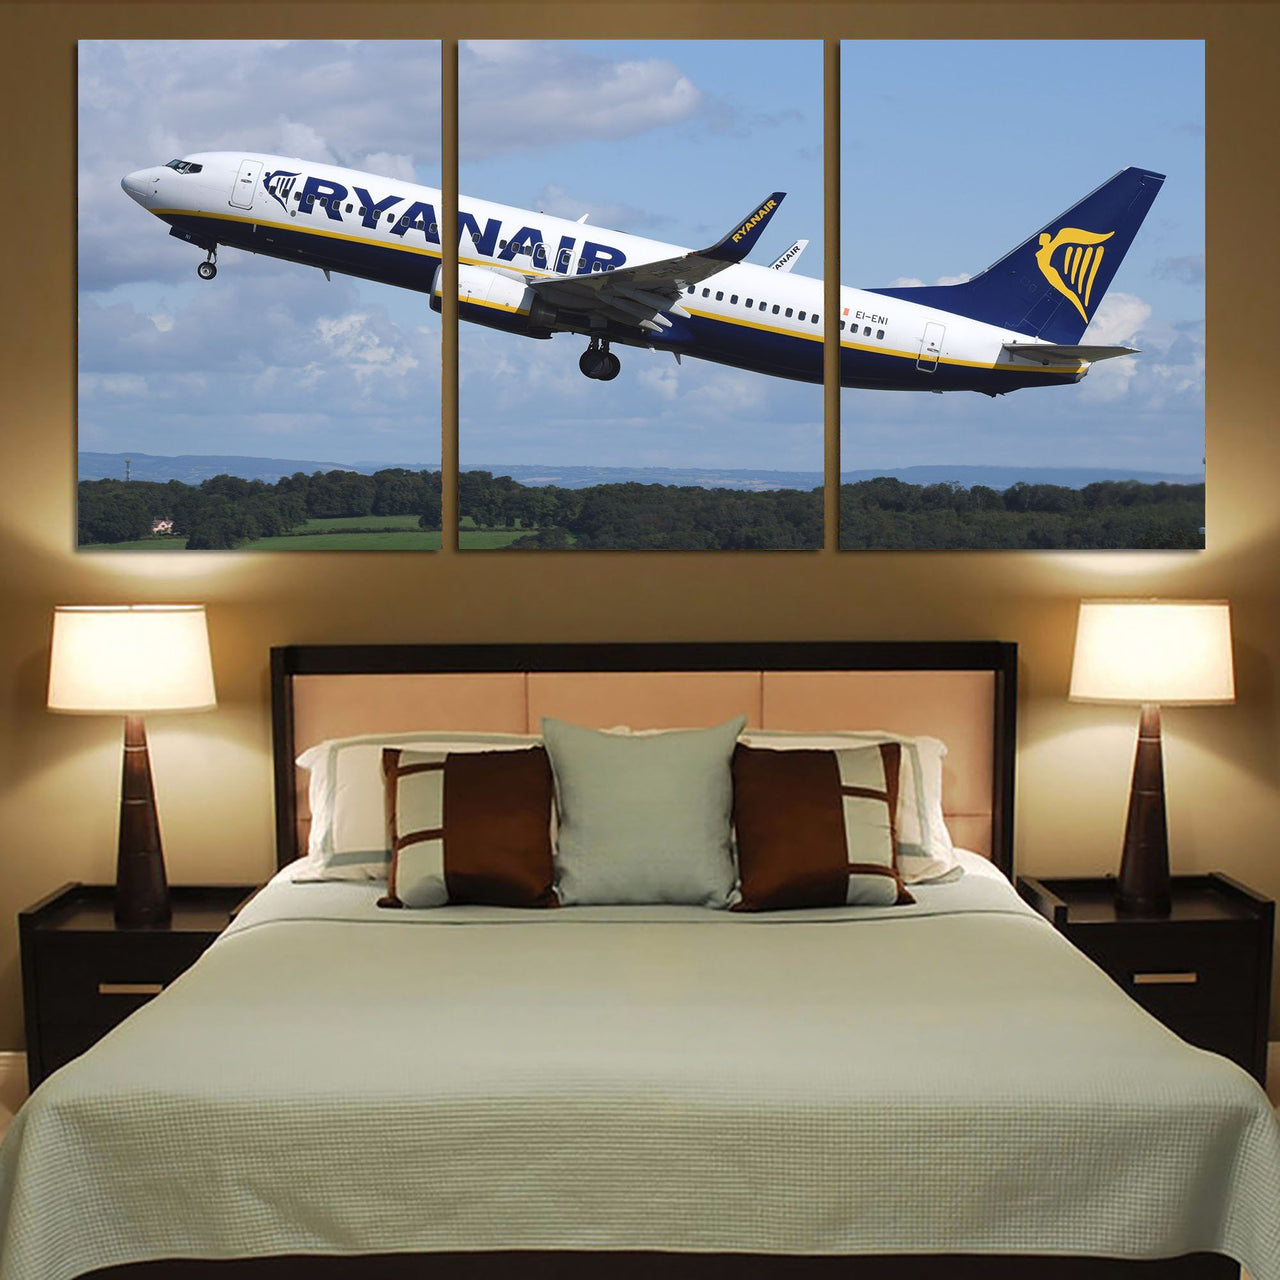 Departing Ryanair's Boeing 737 Printed Canvas Posters (3 Pieces) Aviation Shop 